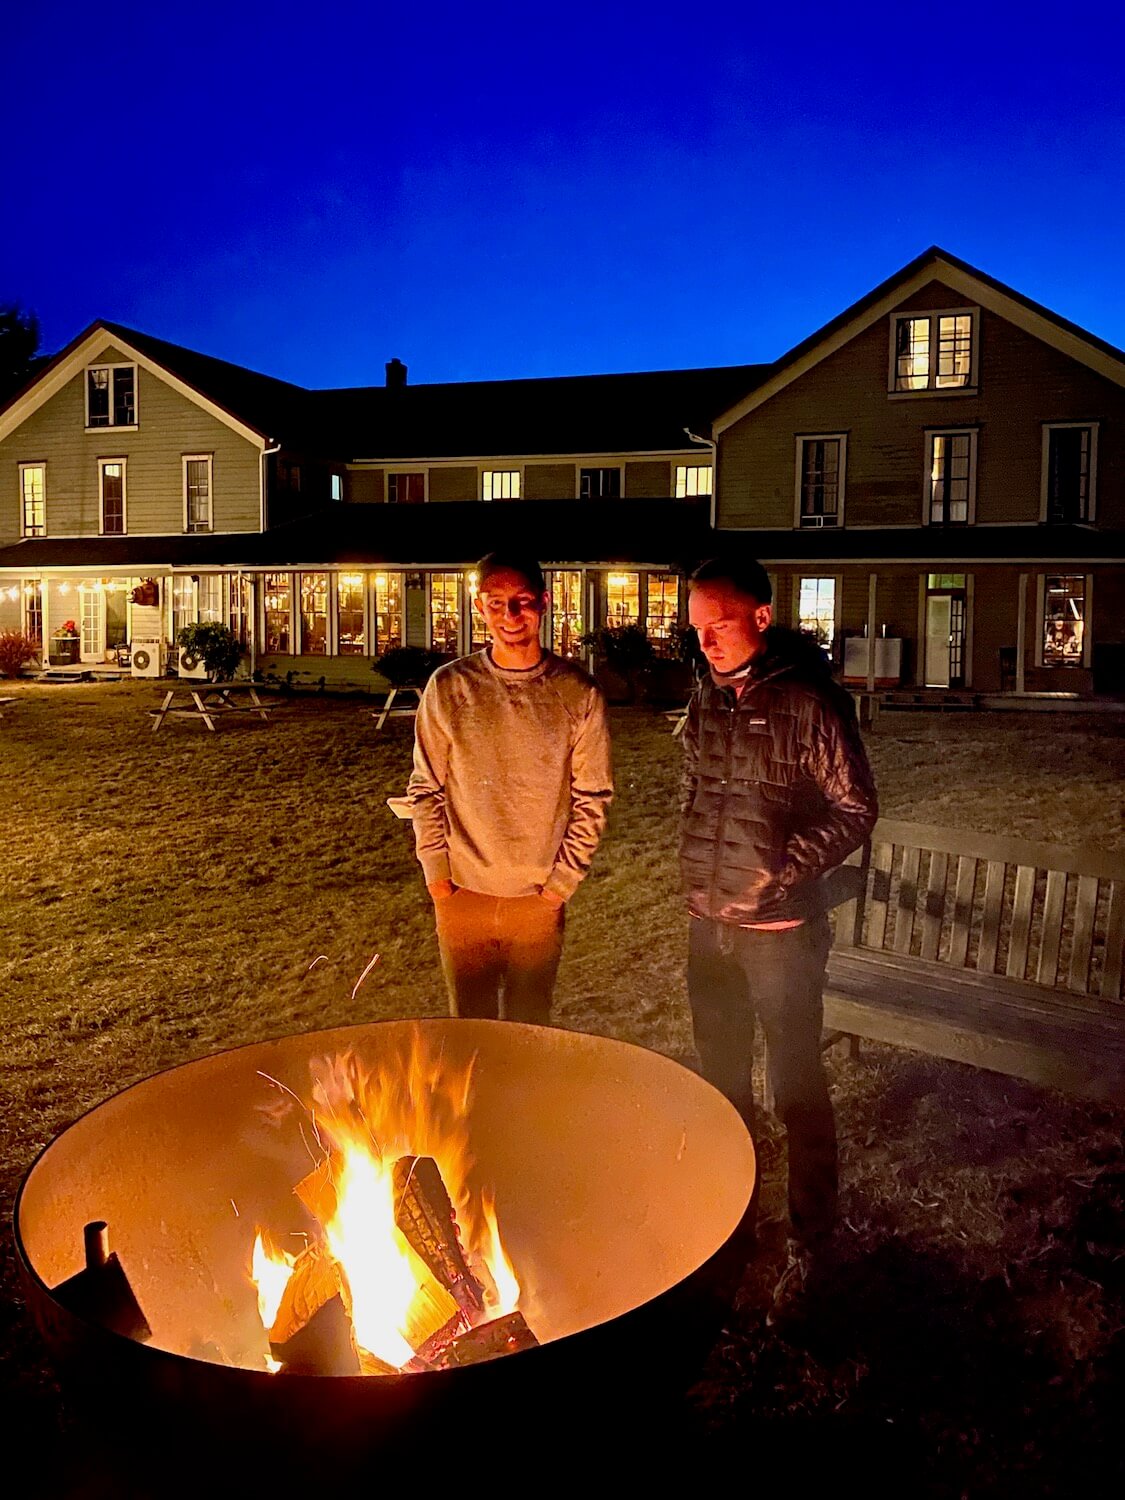 Two men stand beside a fire pit in front of a historic looking wood framed hotel. The fire is bright and crackling yellow and reflects on the faces of the two men. In the background, the hotel commands the skyline, ablaze with lights shining from within all under a blue dusk sky.